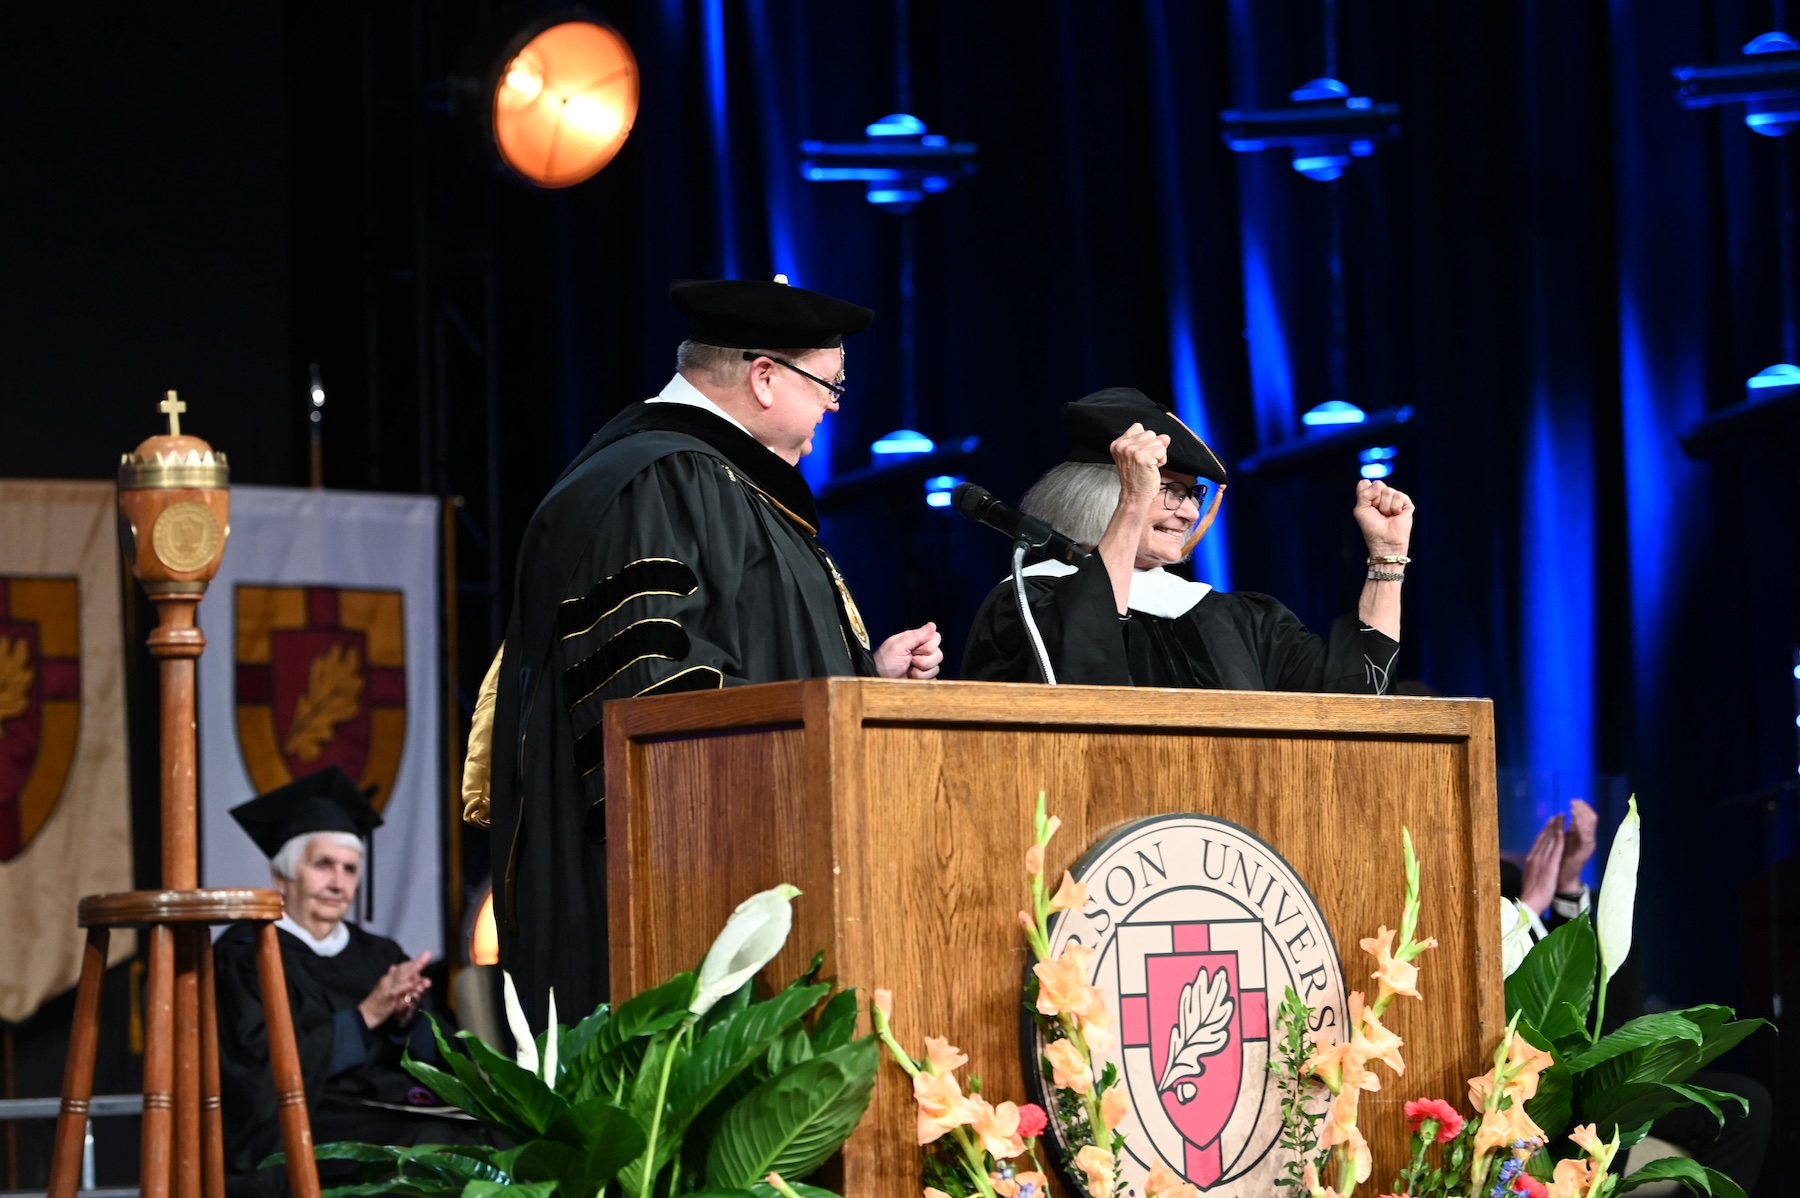 Anderson University Awards Honorary Degrees During Saturday Commencement